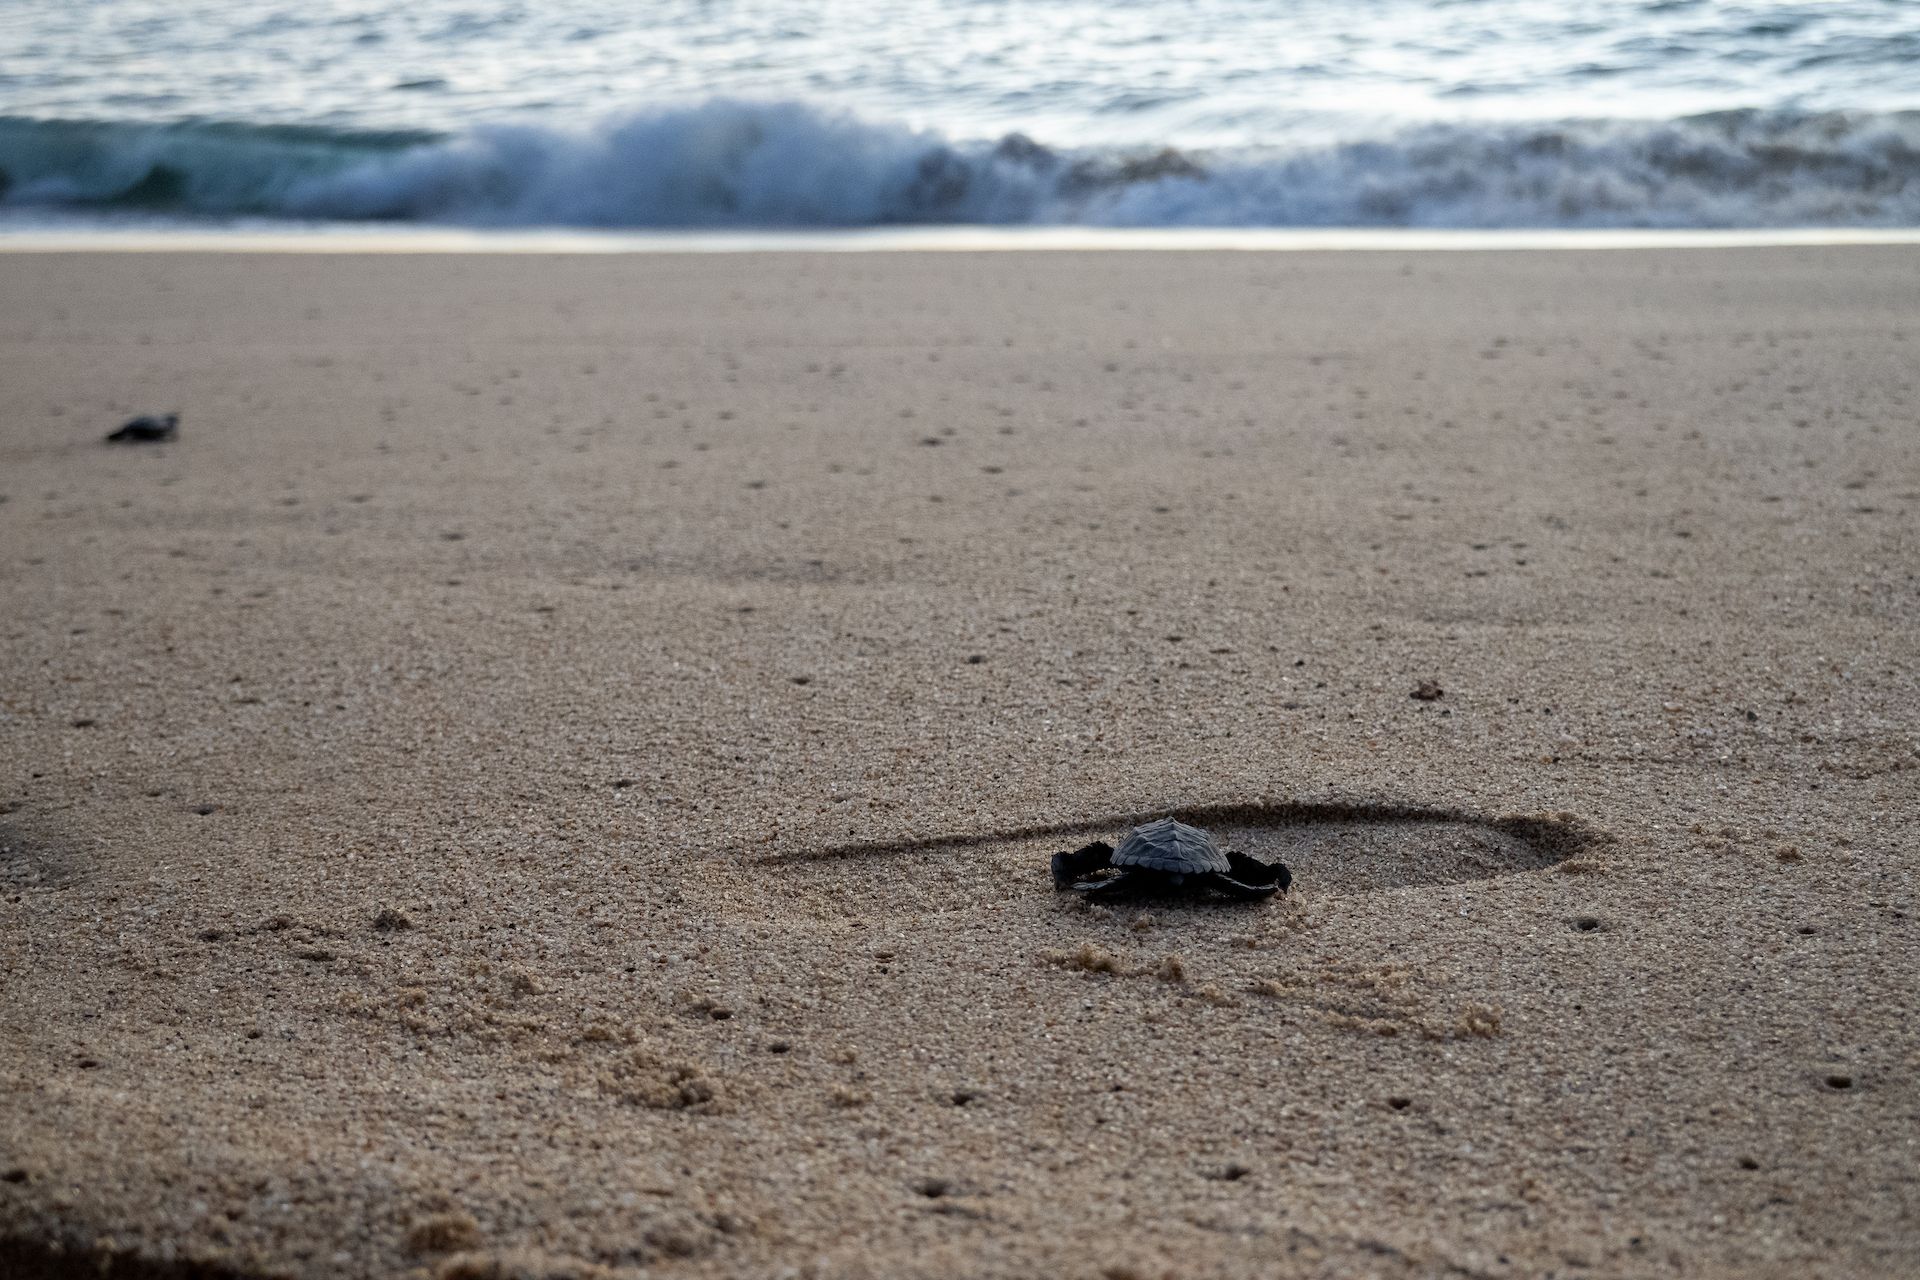 Baby turtles making their way toward the Pacific Ocean to start their life journey